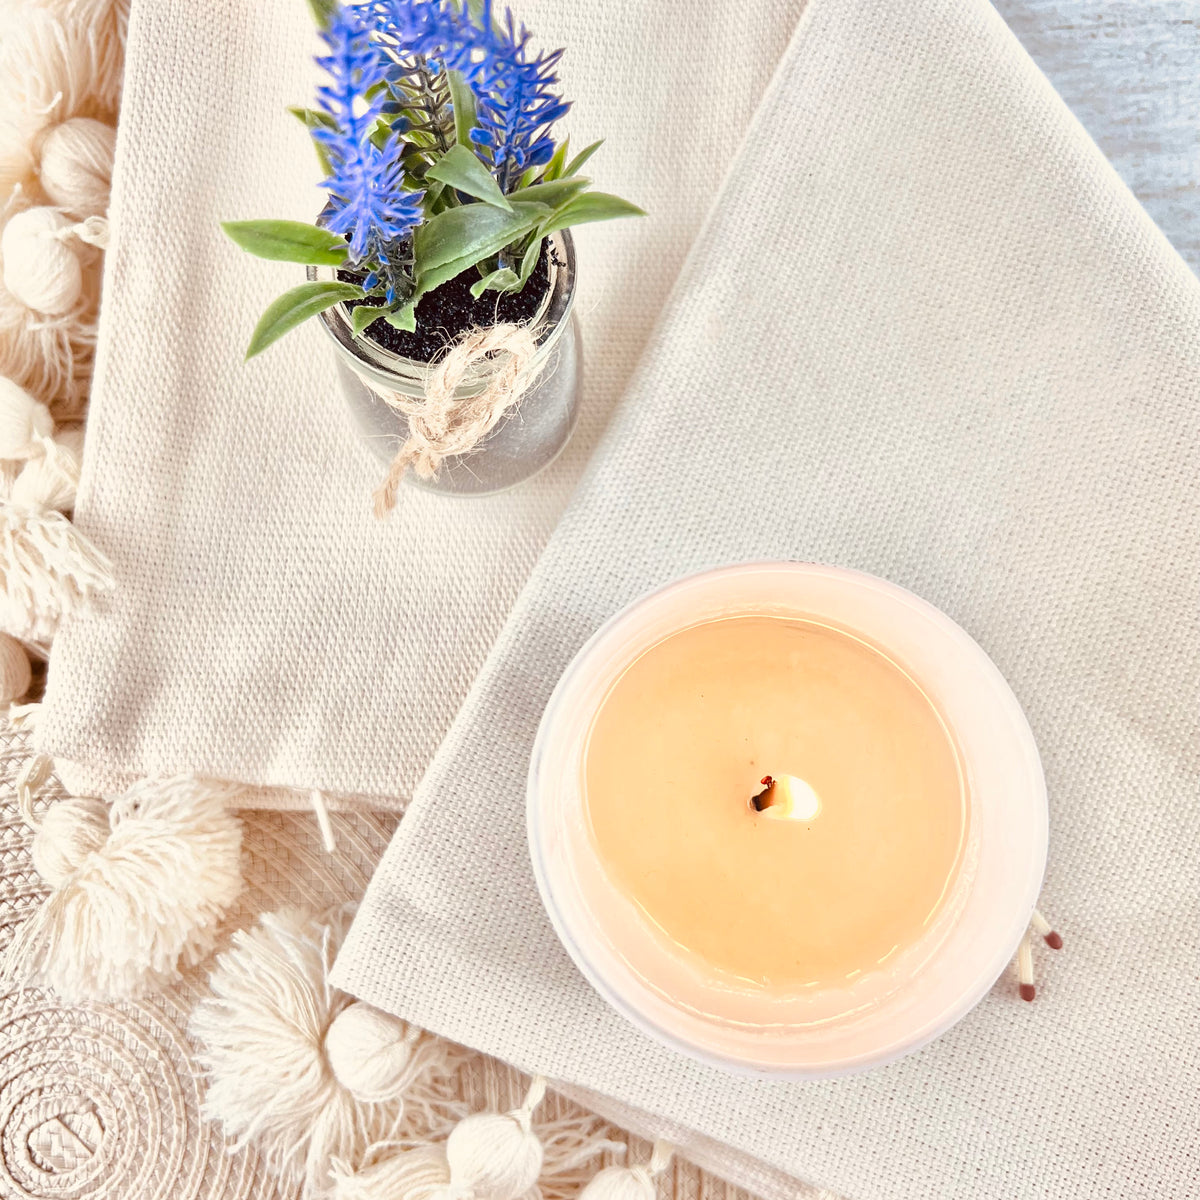 Personalised Birth Flower Soy Candle